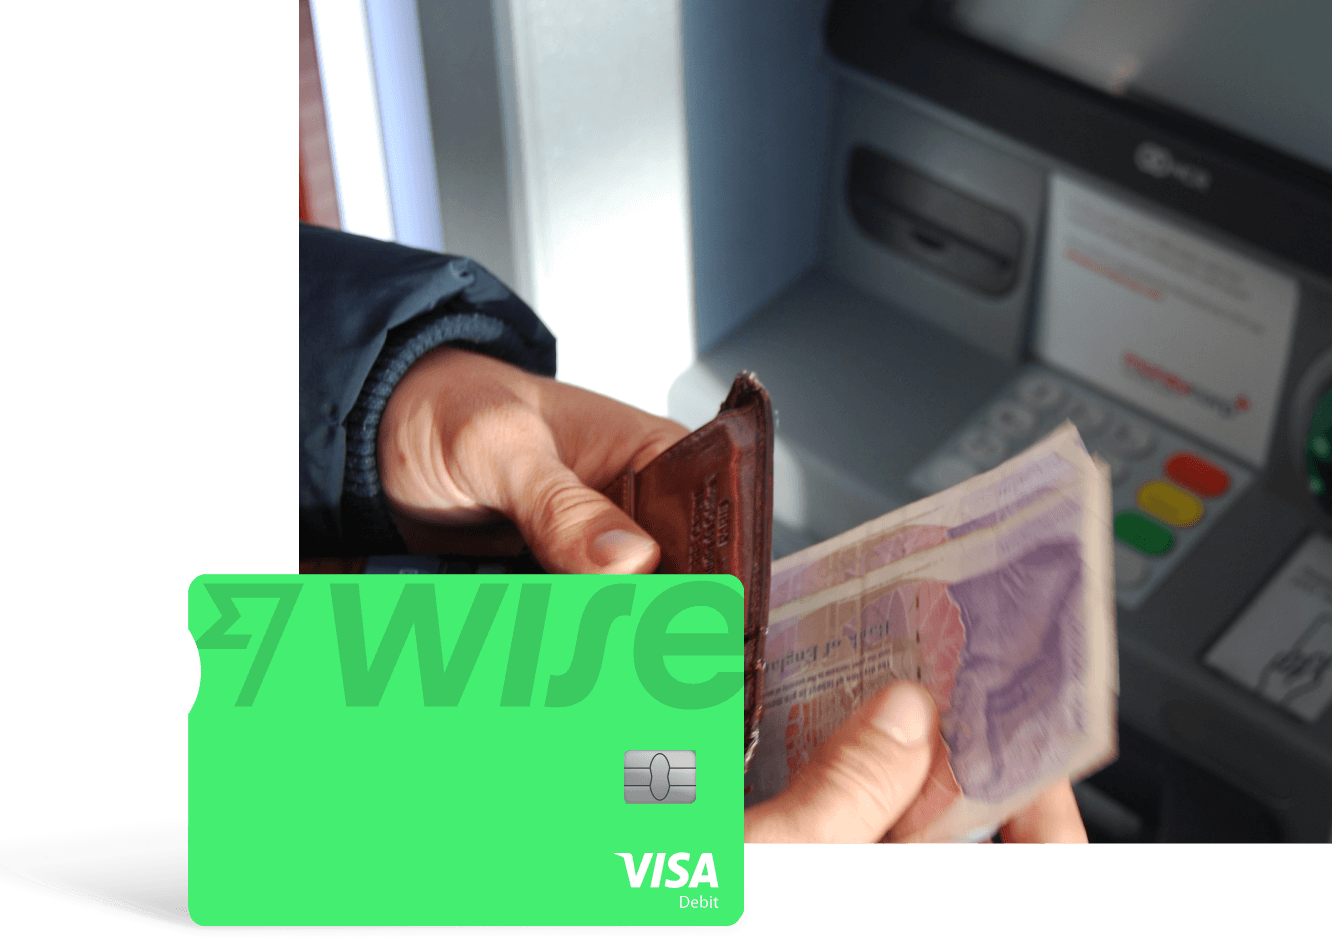 Using the Wise debit card will get you a better deal on cash withdrawls